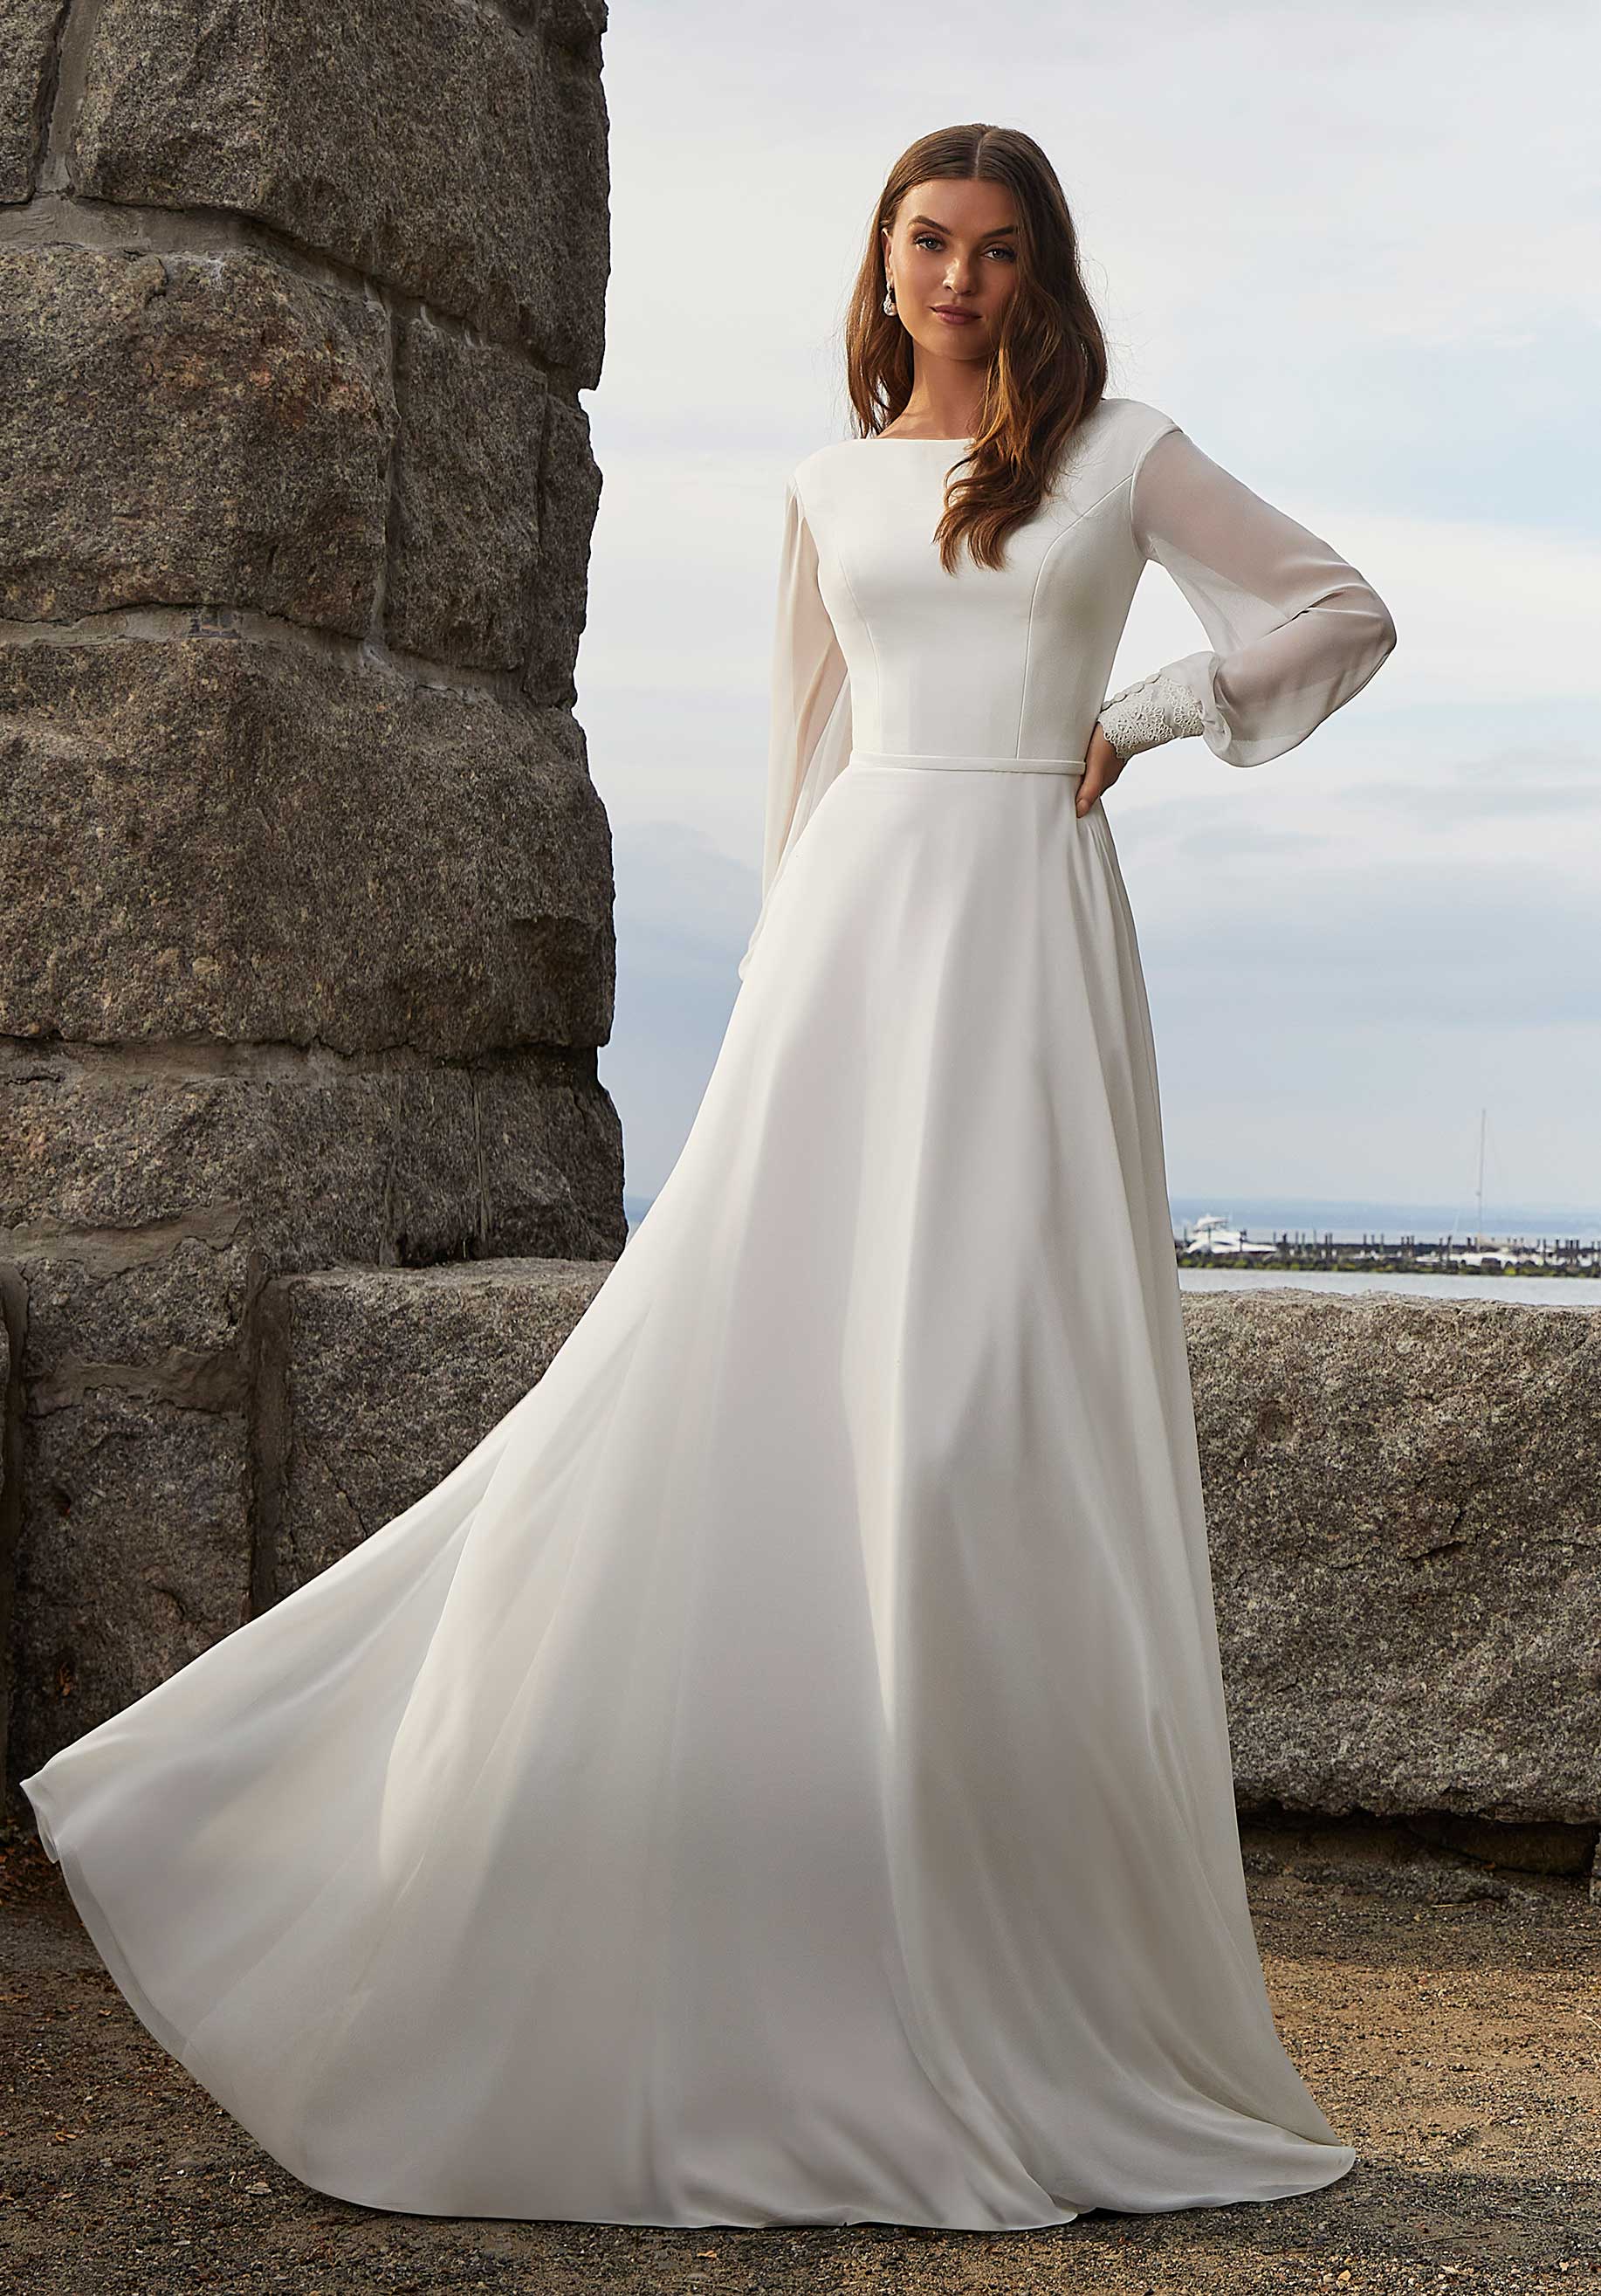 32 Winter Wedding Dresses Perfect for cold day | Long sleeve dresses